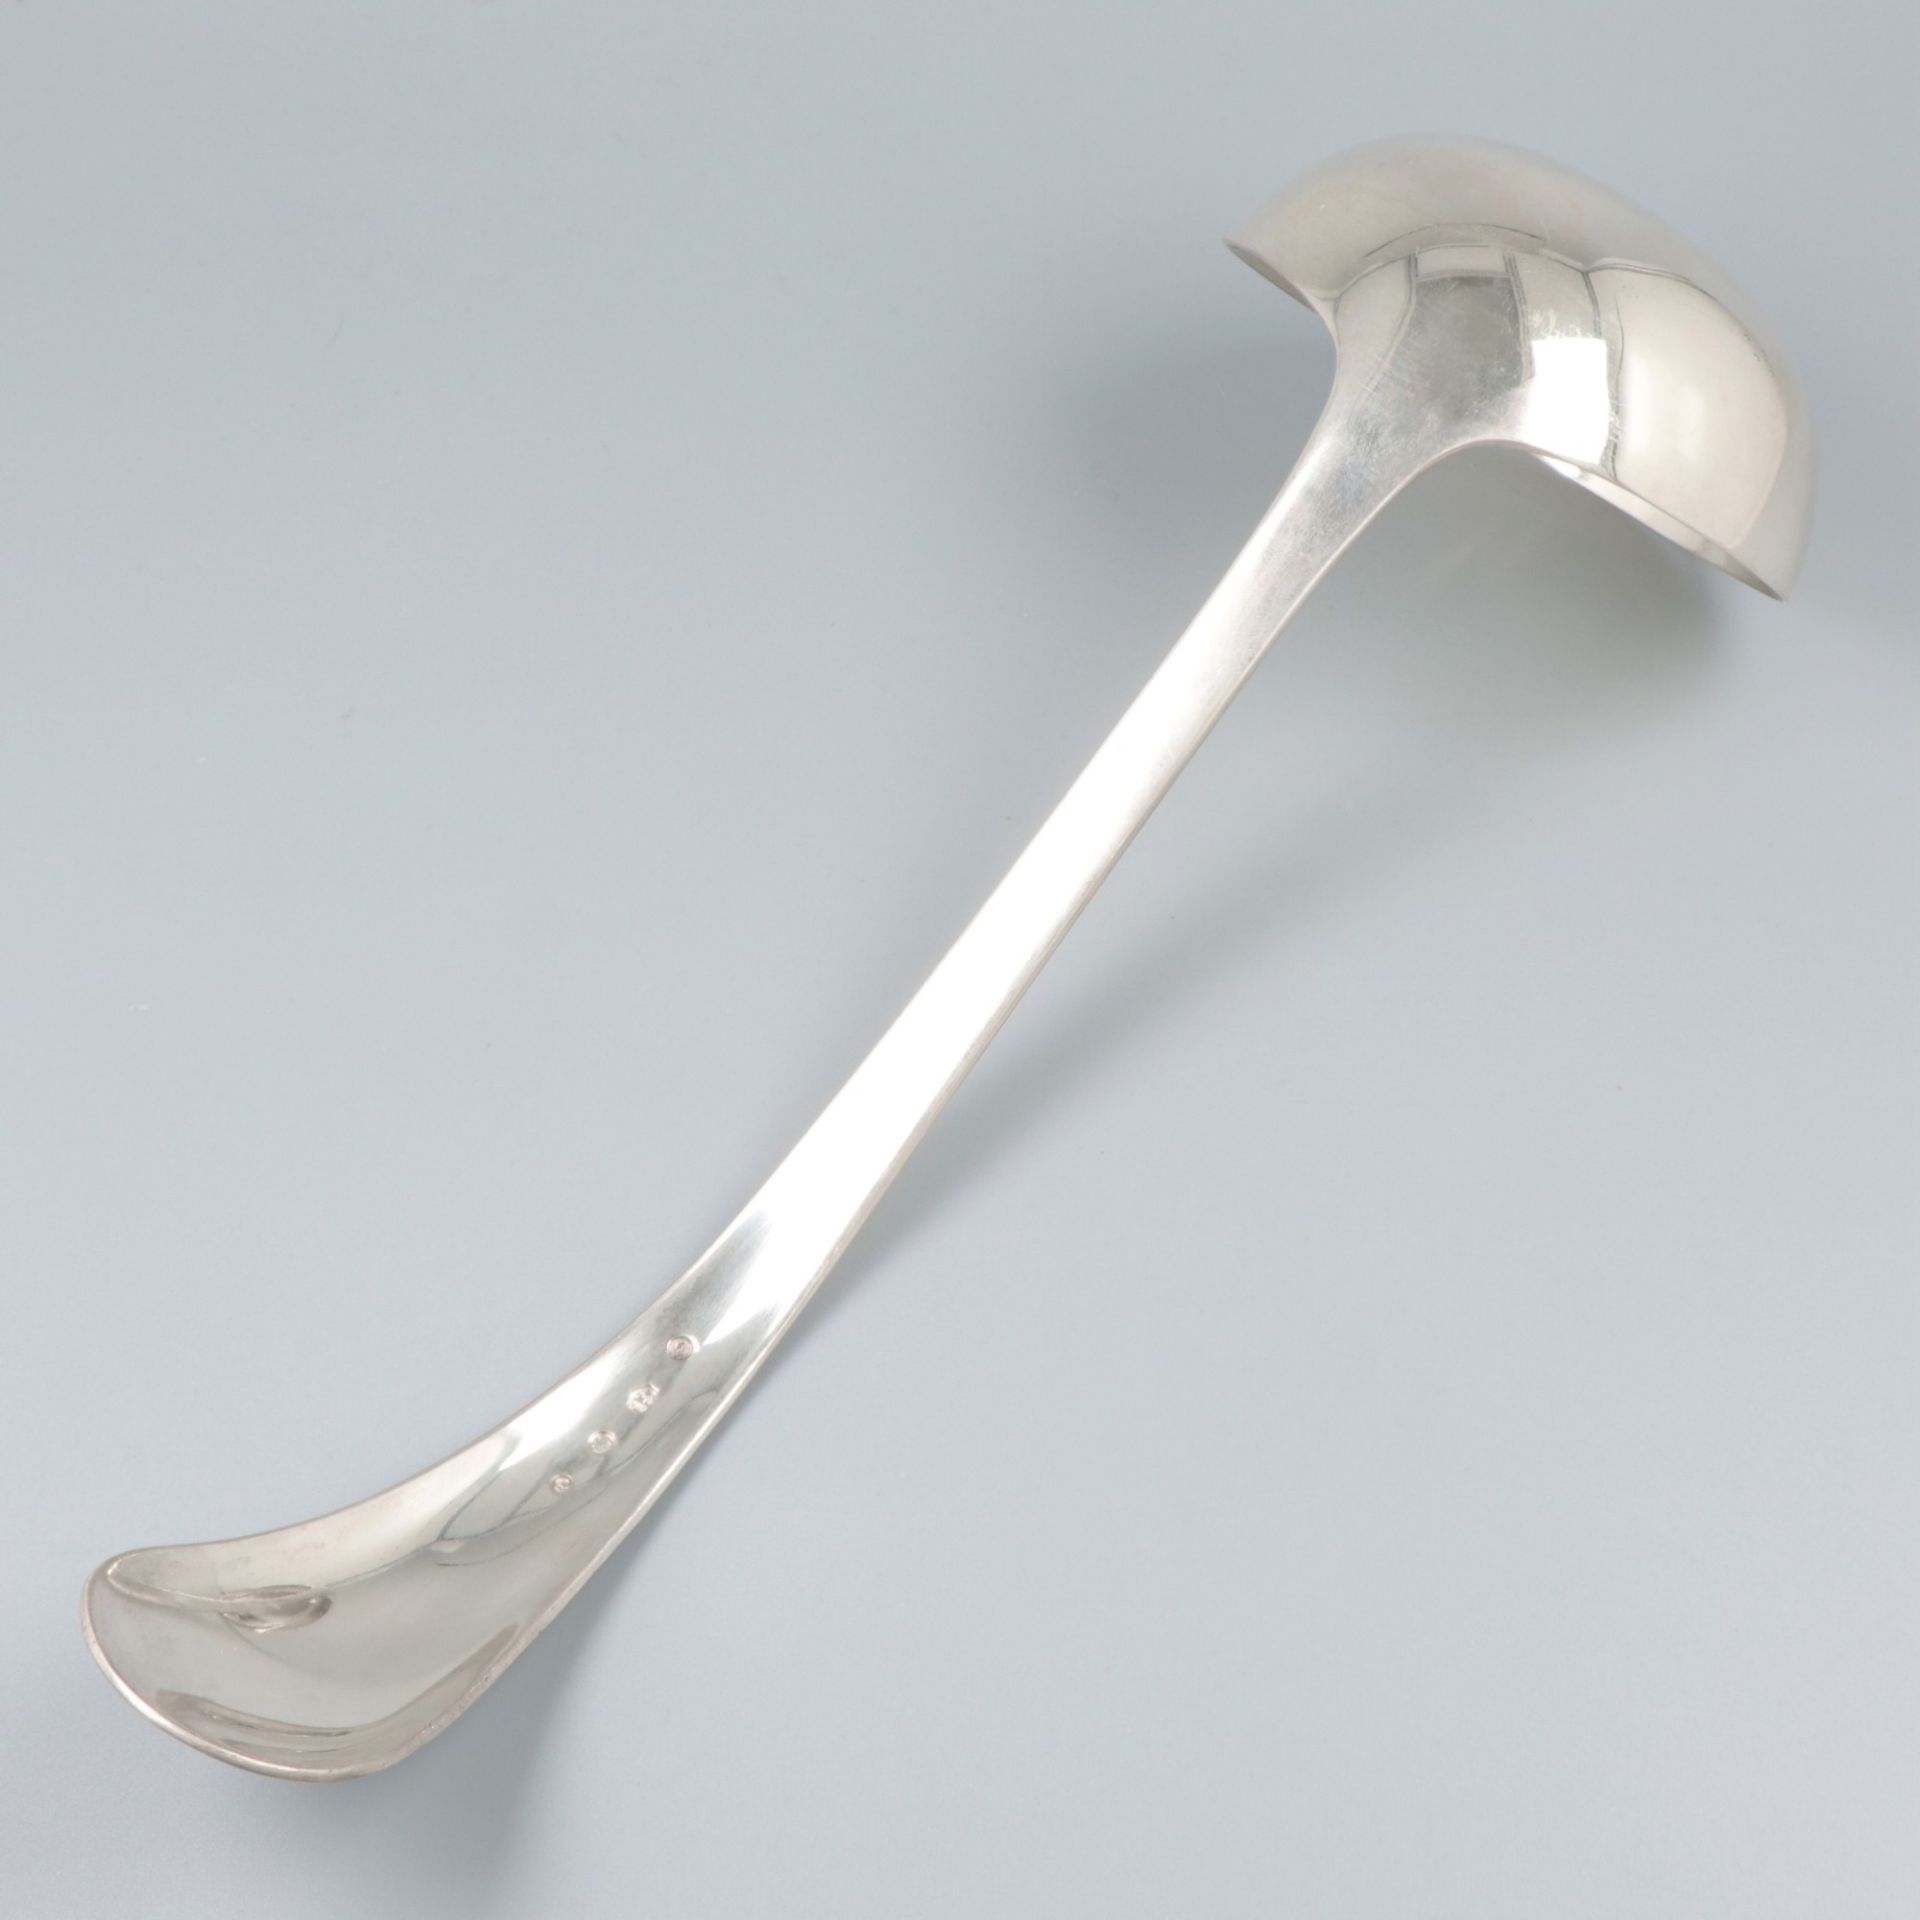 Soup spoon, silver. - Image 3 of 6